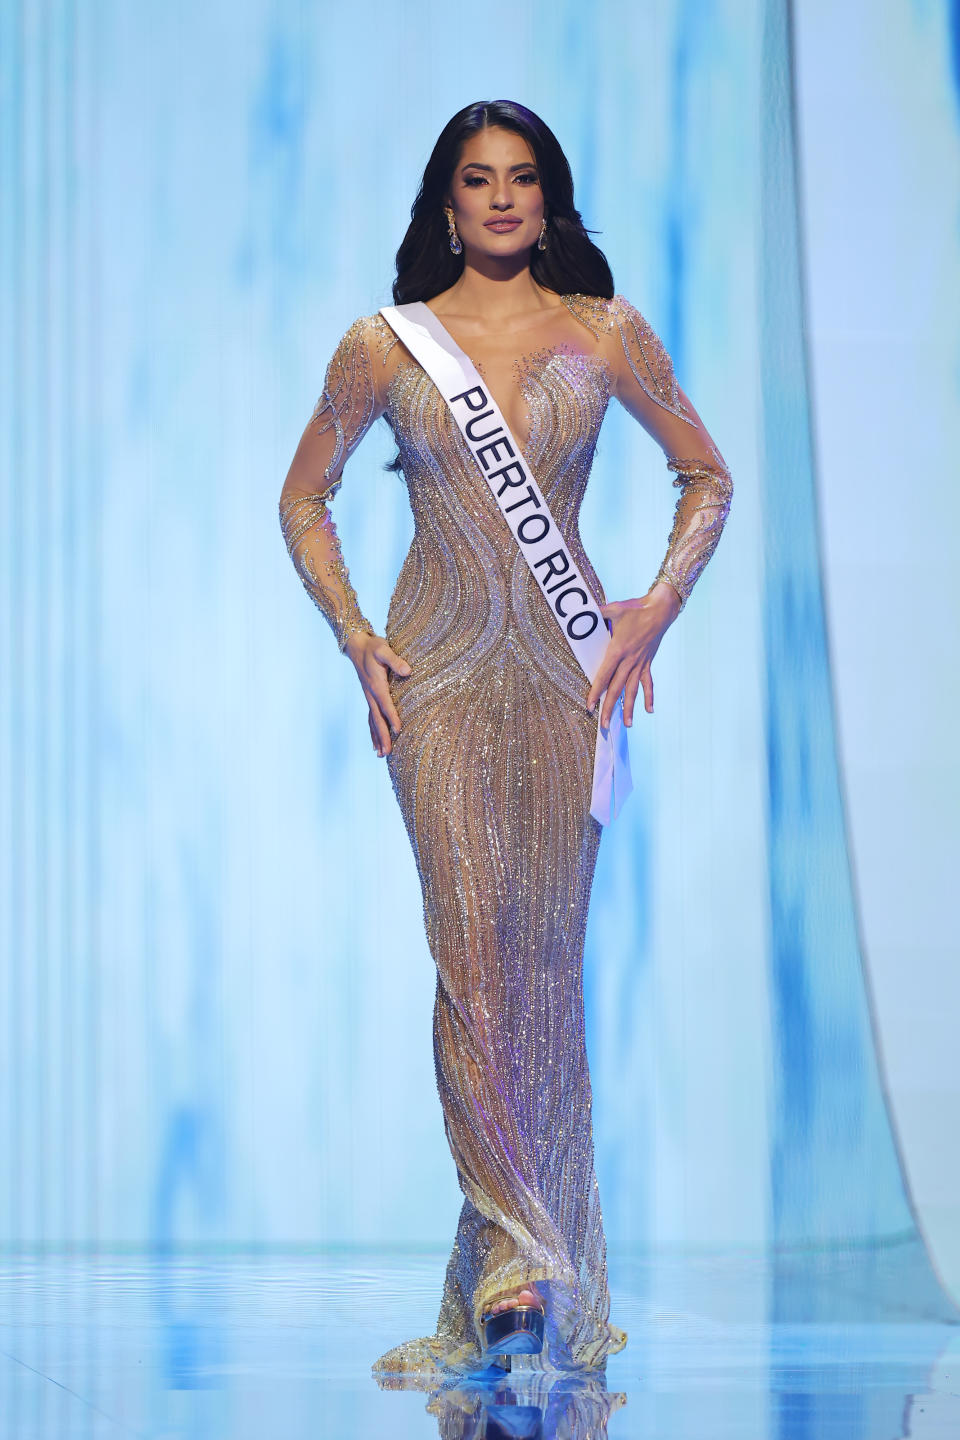 SAN SALVADOR, EL SALVADOR - NOVEMBER 15: Miss Puerto Rico Karla Guilfú Acevedo attends the The 72nd Miss Universe Competition - Preliminary Competition at Gimnasio Nacional Jose Adolfo Pineda on November 15, 2023 in San Salvador, El Salvador. (Photo by Hector Vivas/Getty Images)